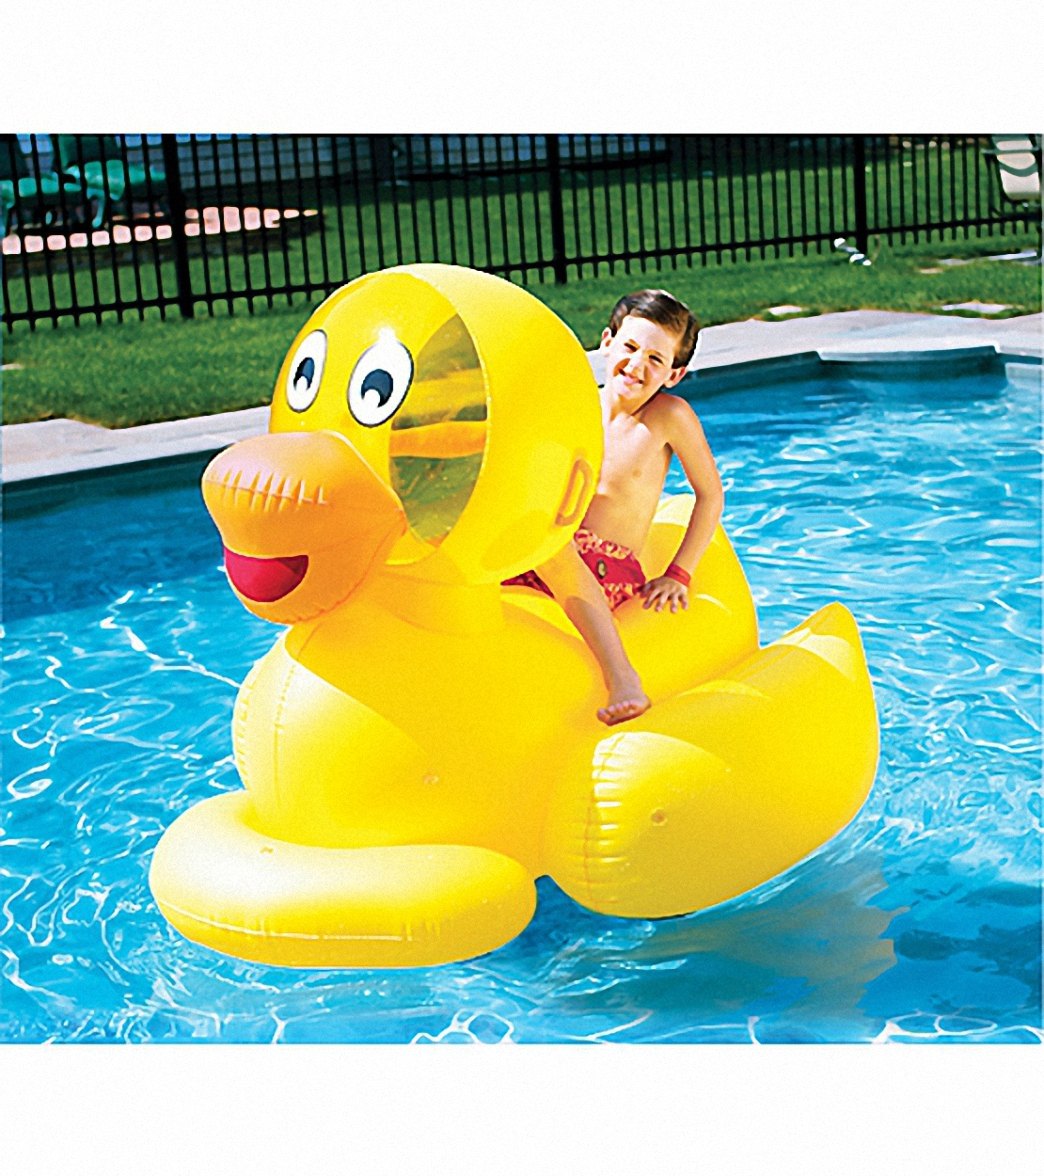 Swimline Giant Ducky Ride-On Pool Float at SwimOutlet.com